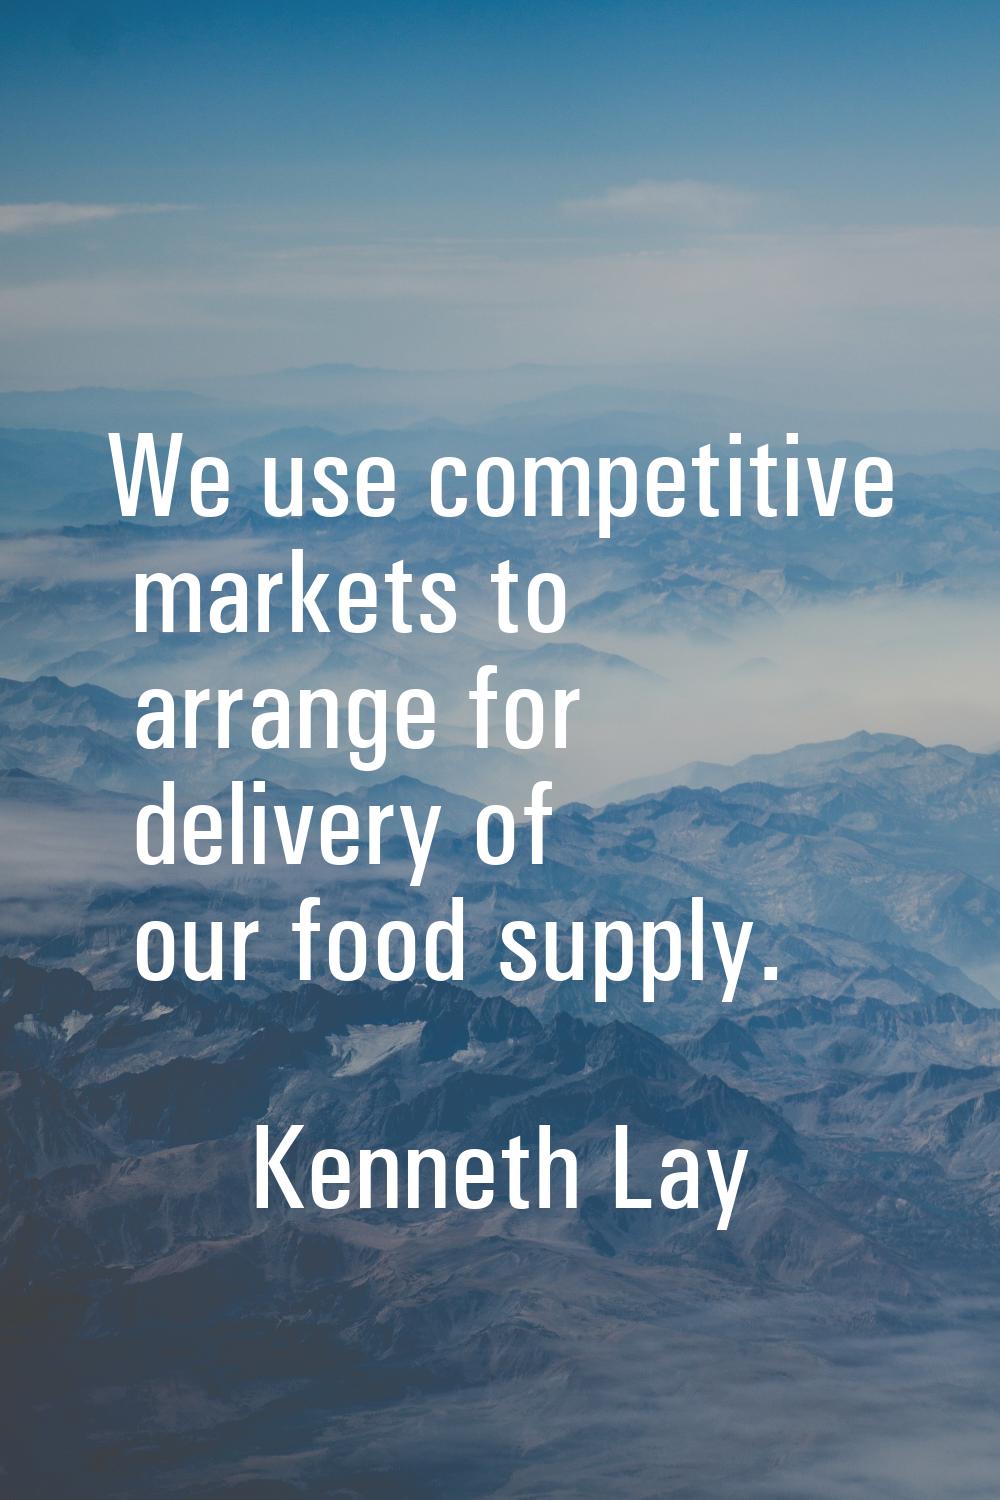 We use competitive markets to arrange for delivery of our food supply.